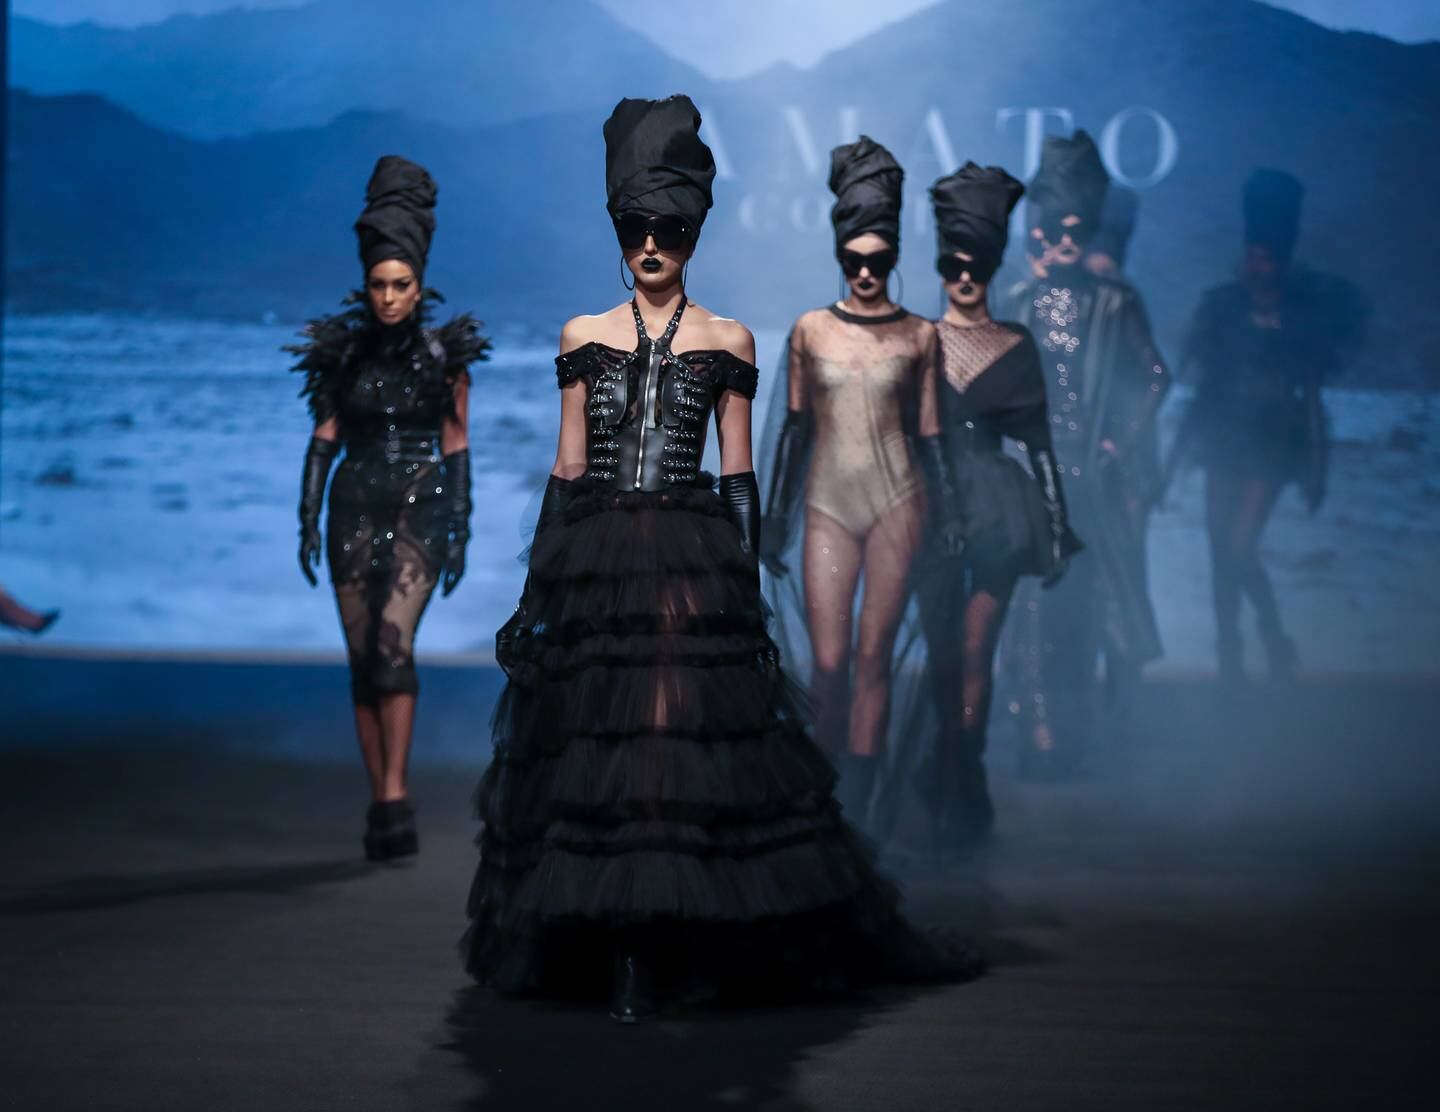 Amato by Furne One's Birds of Prey collection on show at Arab Fashion Week. Victor Besa / The National